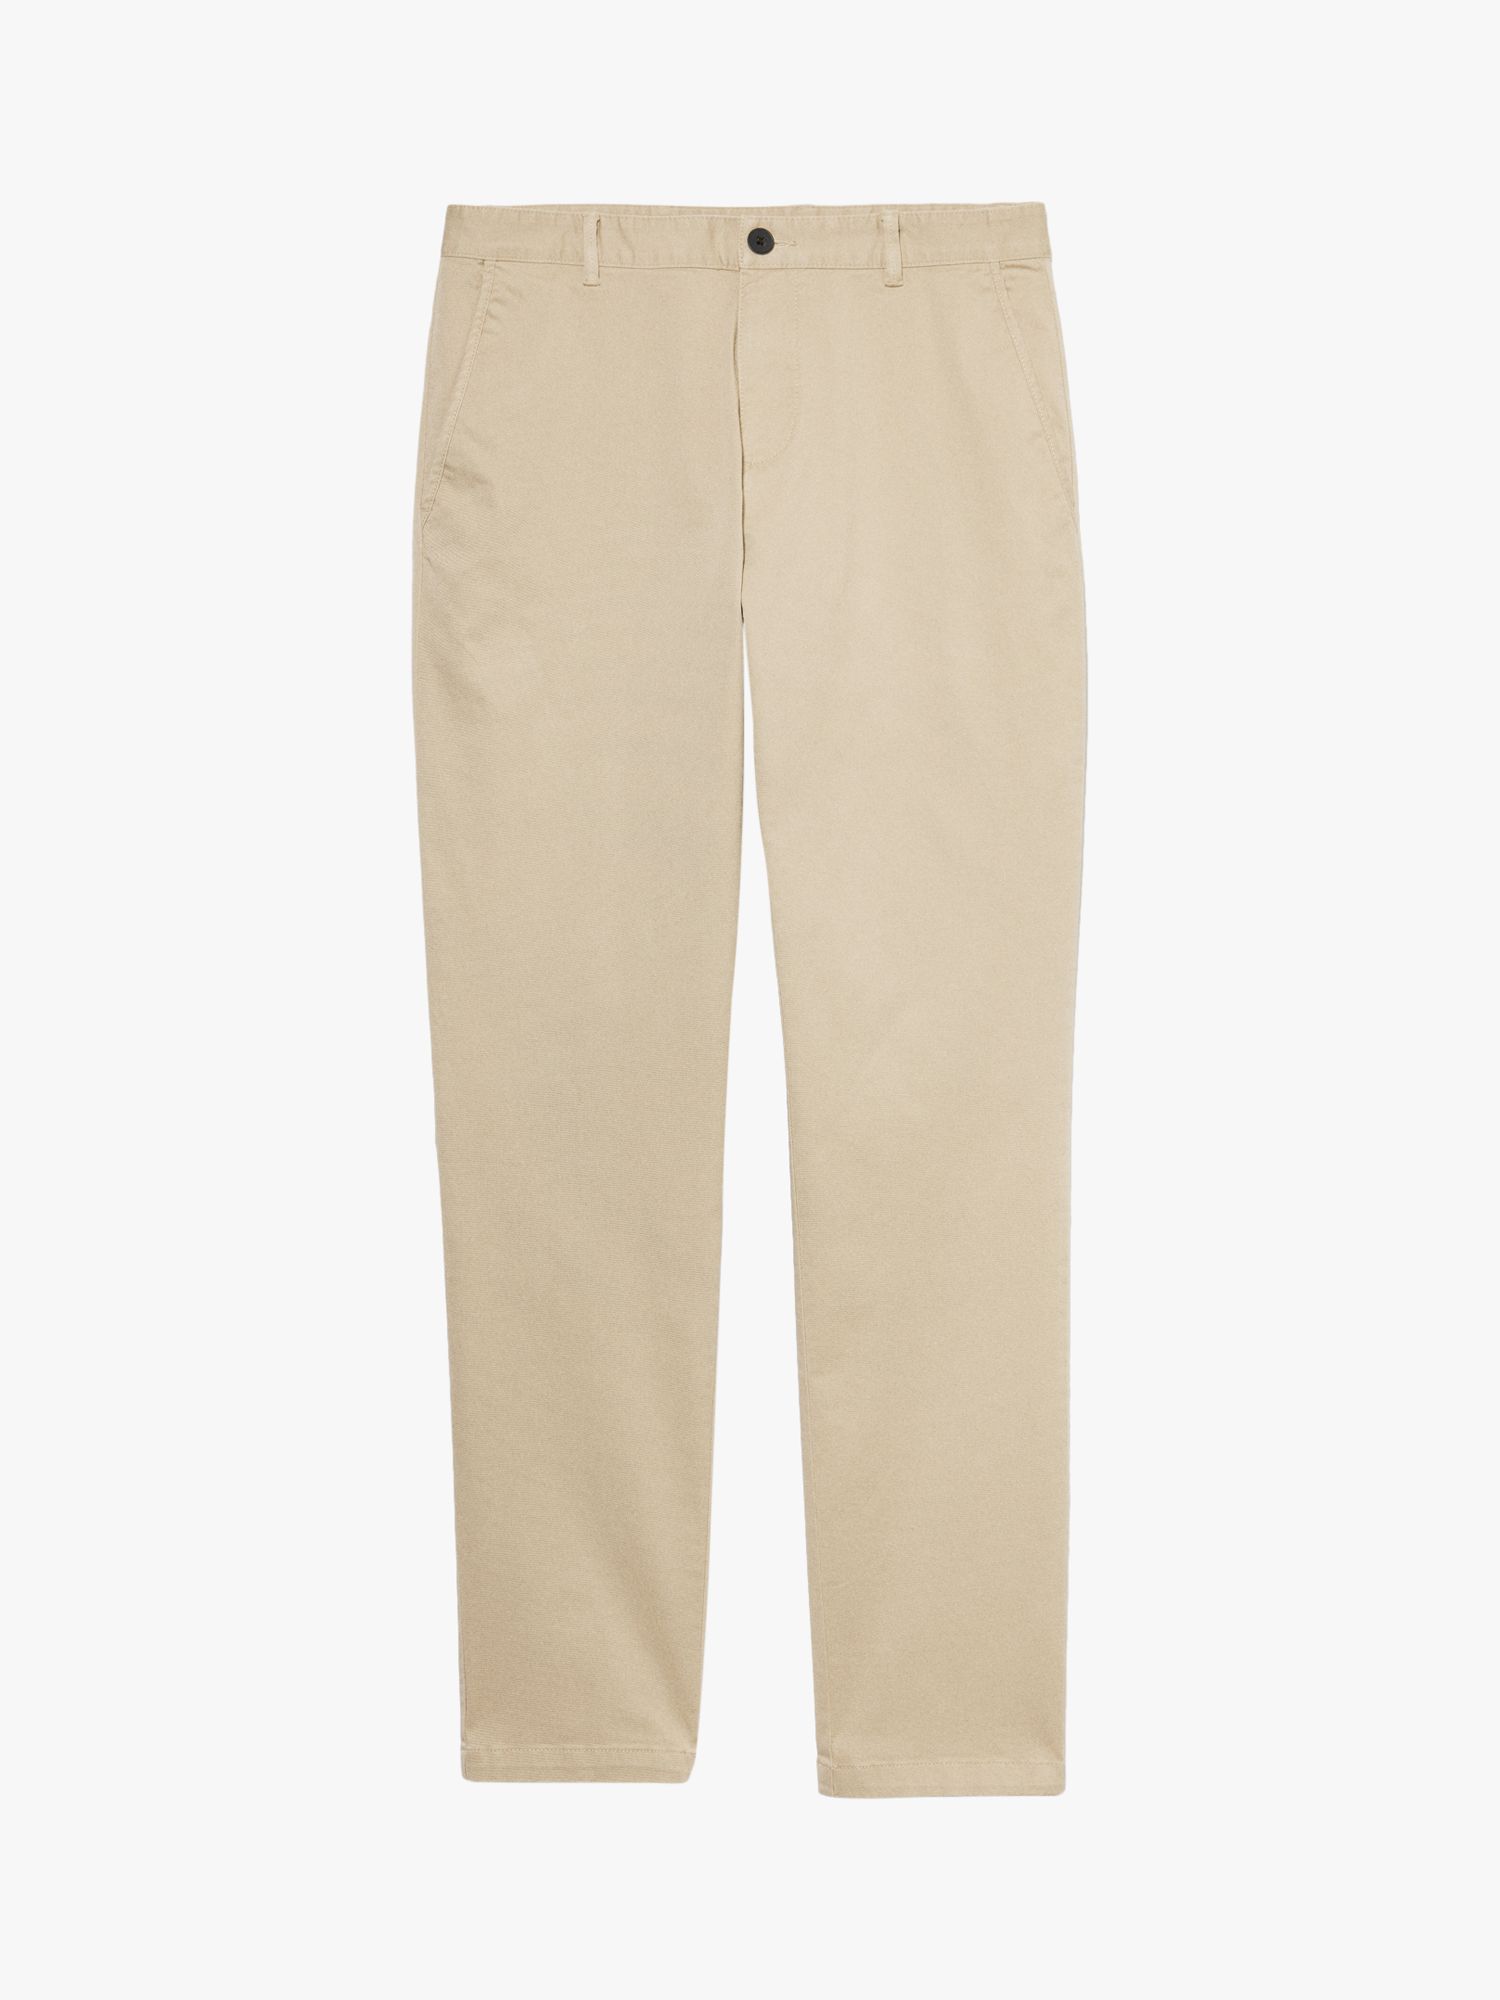 SISLEY Stretch Cotton Drill Chino Trousers, Brown, 38